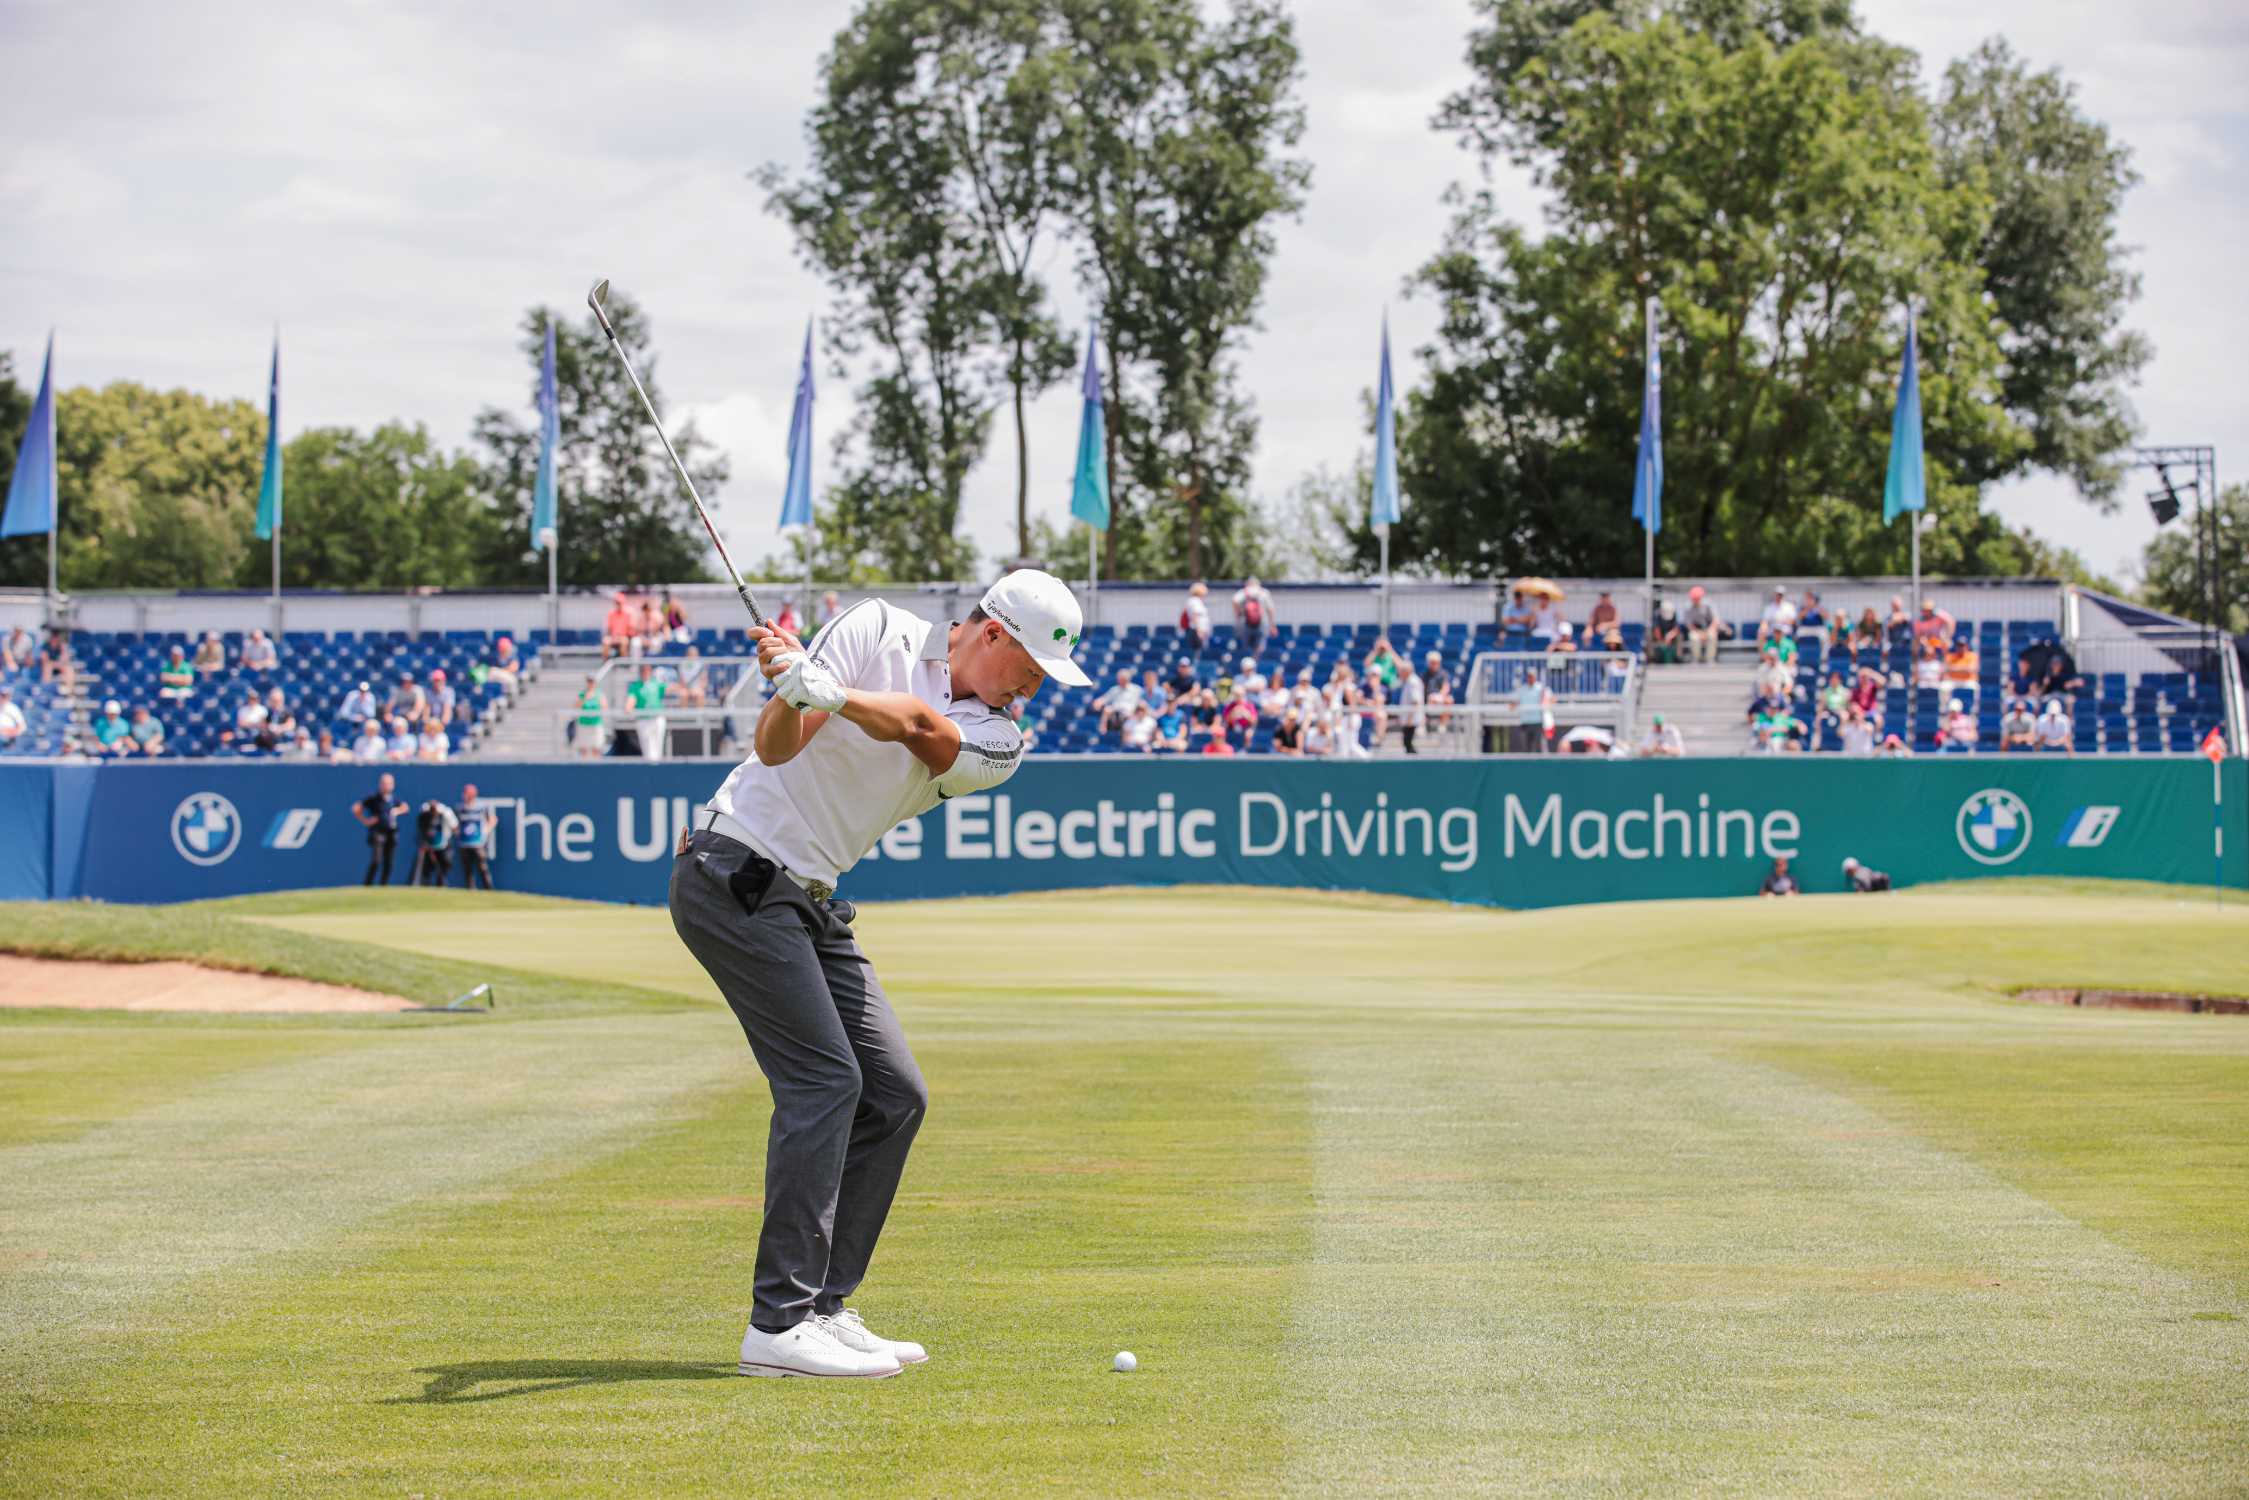 BMW International Open: Images from Friday morning.